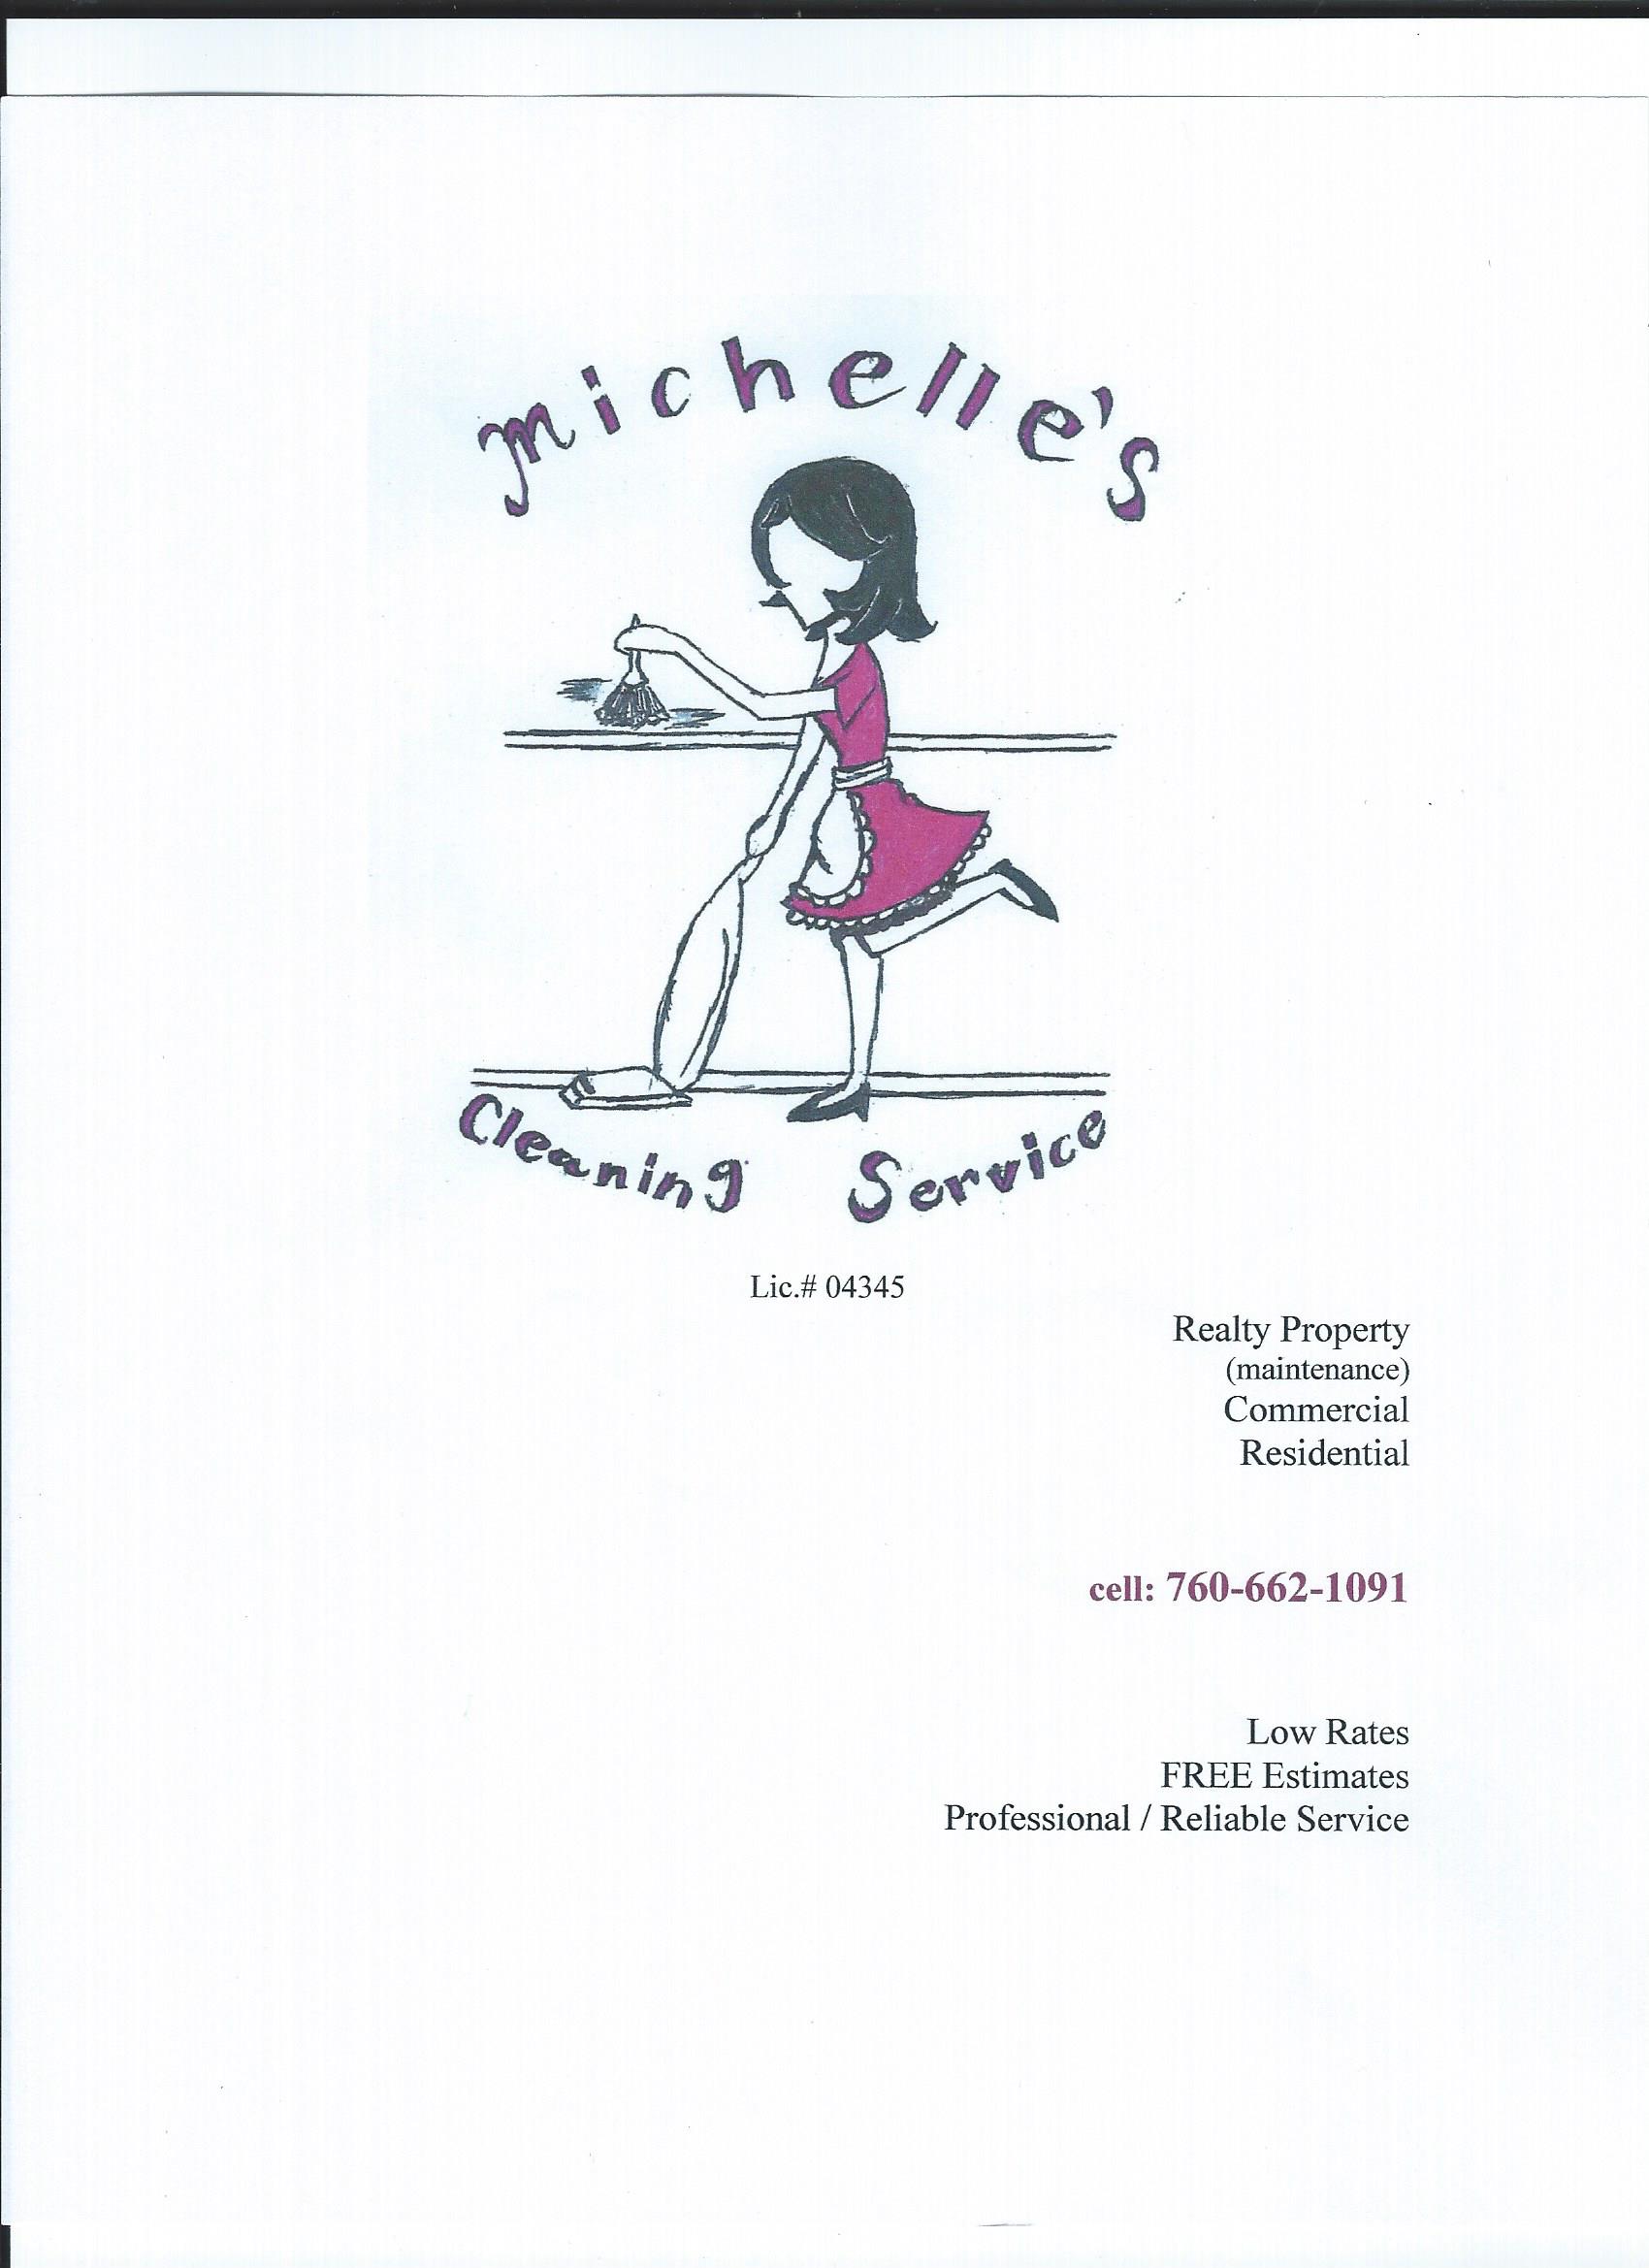 Michelle's Cleaning Service Logo